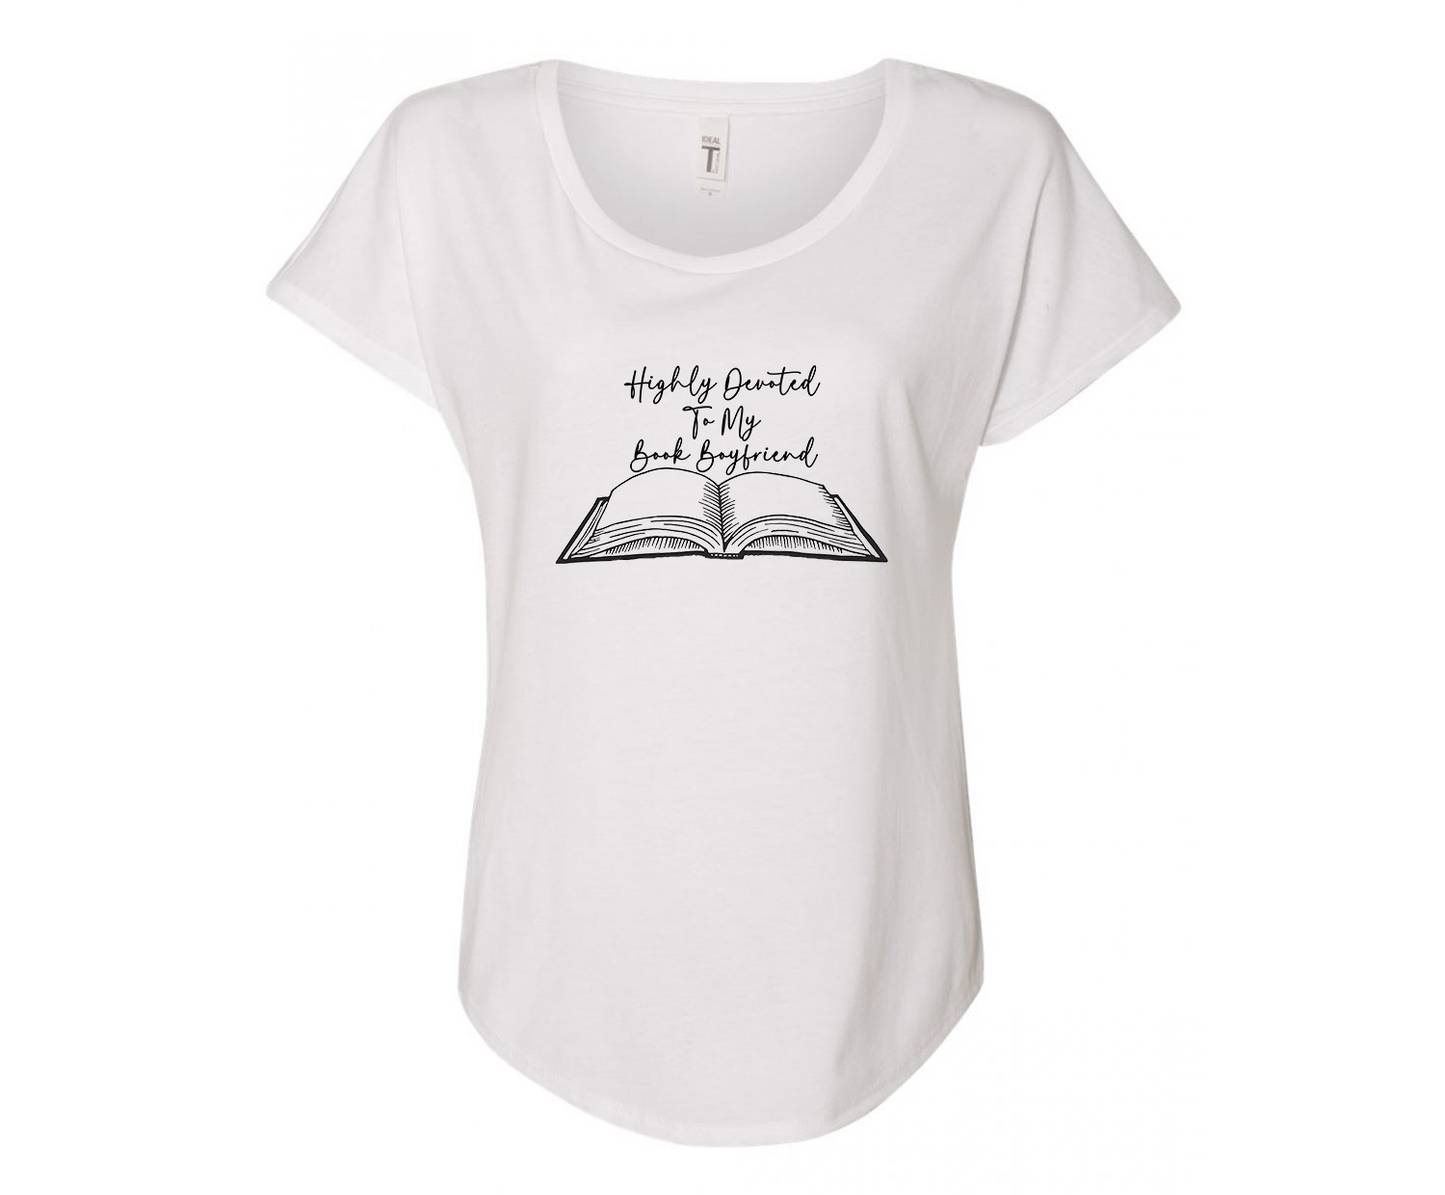 Highly Devoted To My Book Boyfriend Ladies Tee Shirt - In Grey & White